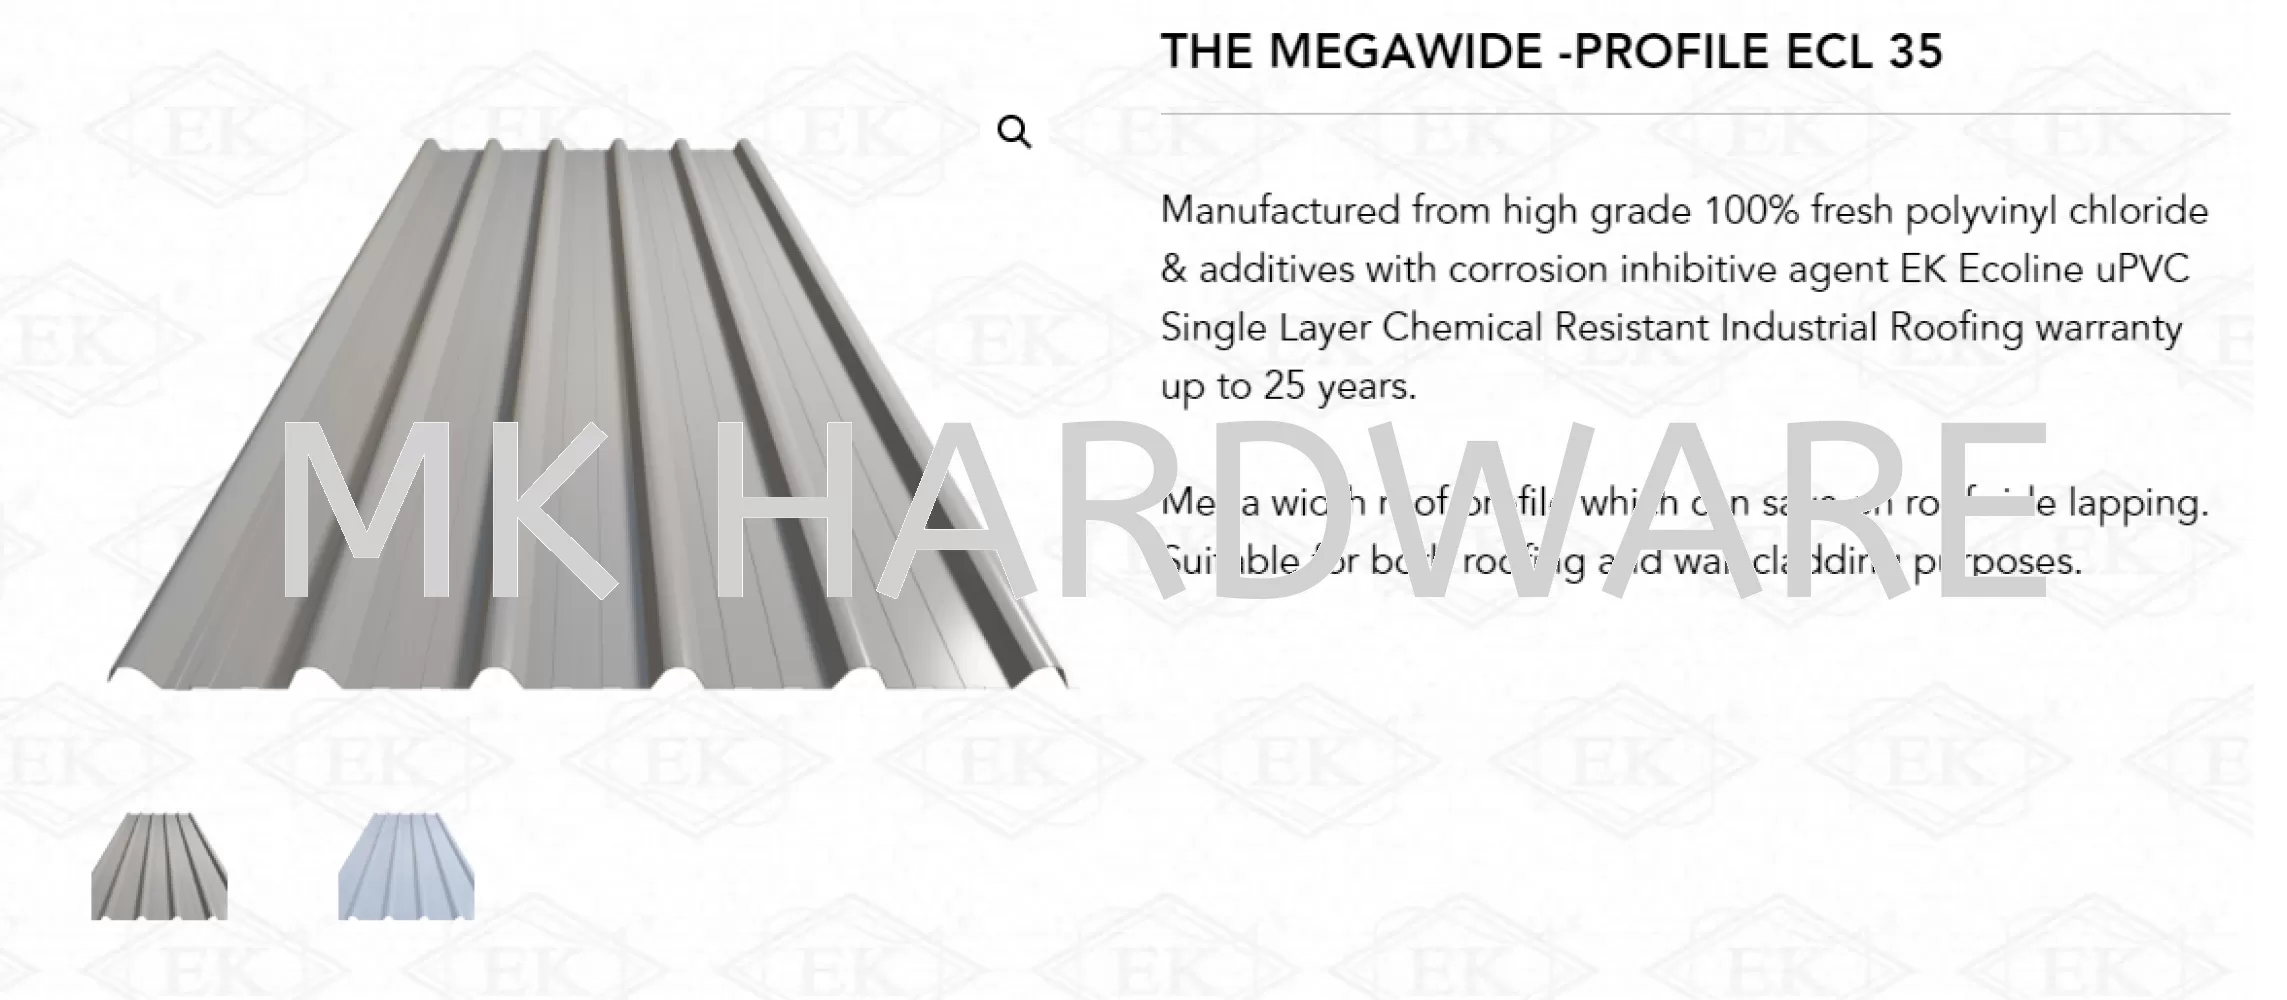 THE MEGAWIDE - PROFILE ECL 35